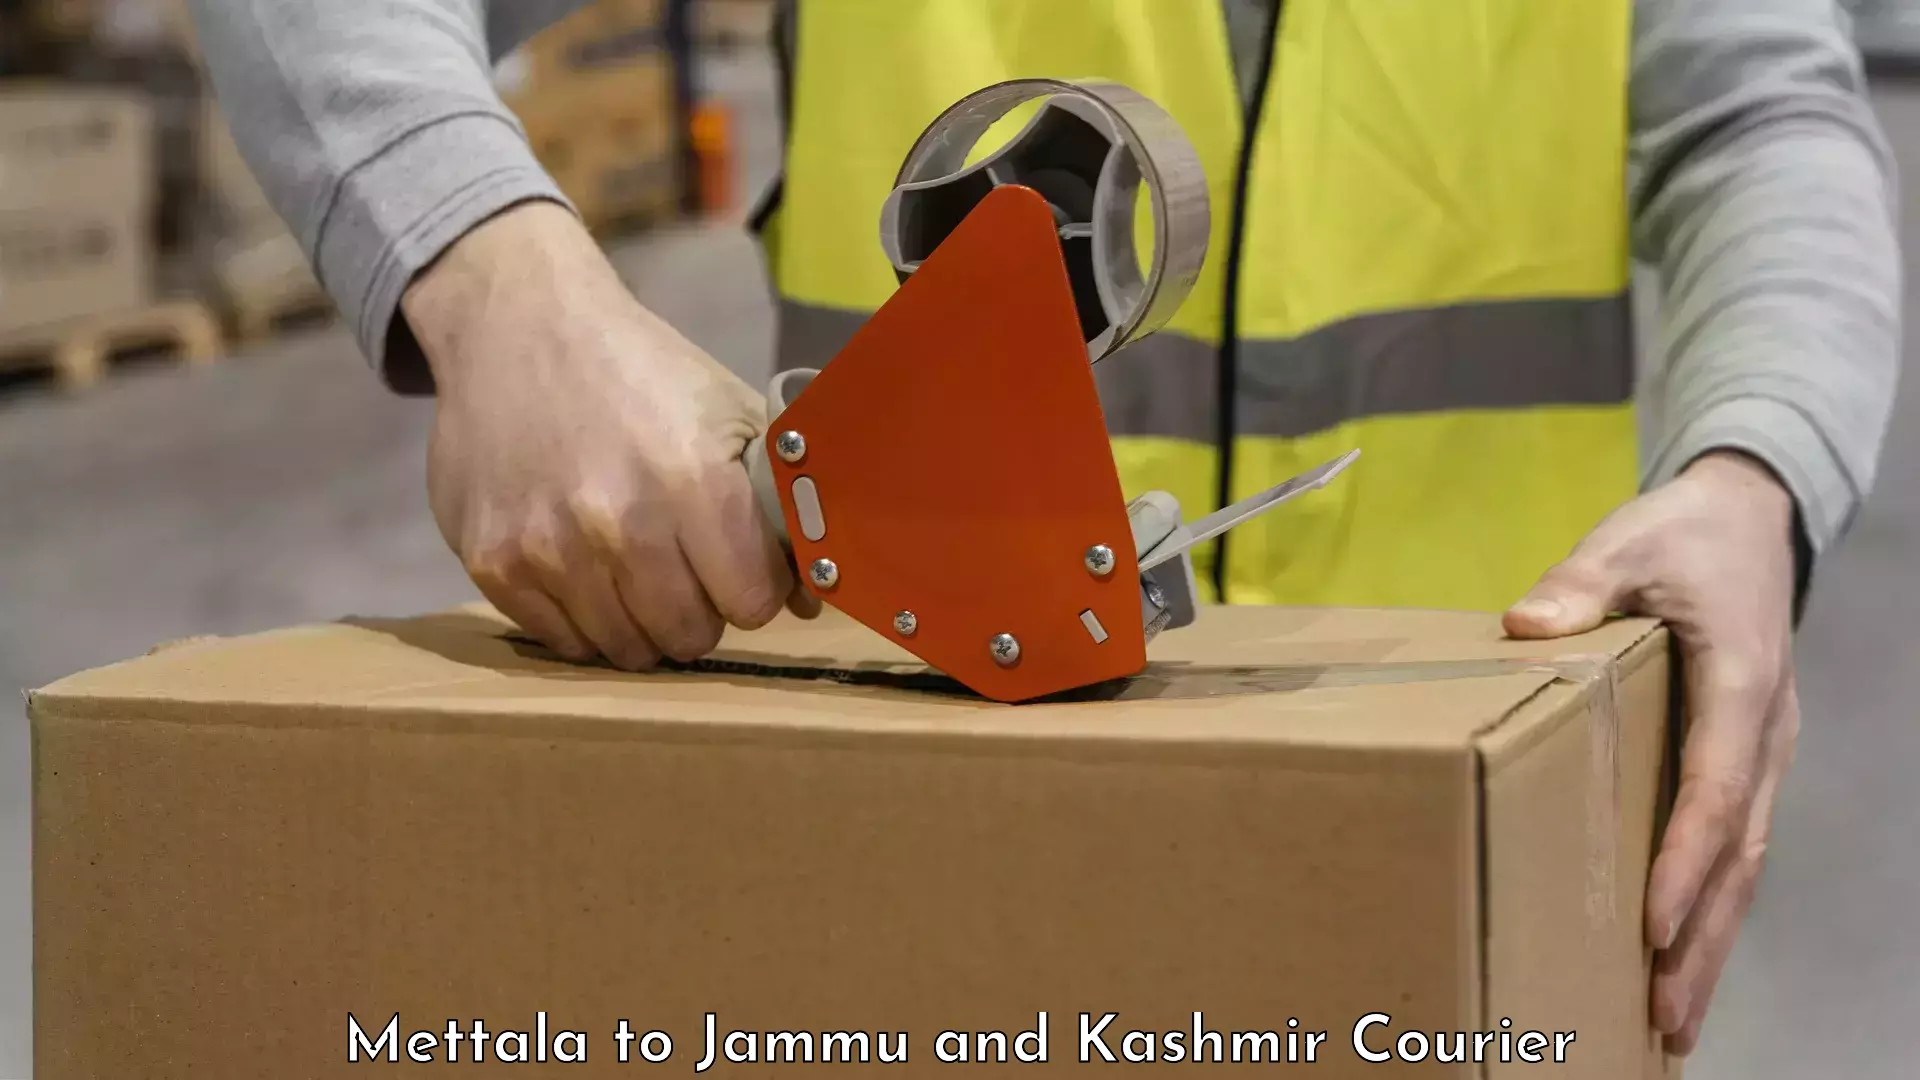 Baggage shipping service Mettala to Jammu and Kashmir